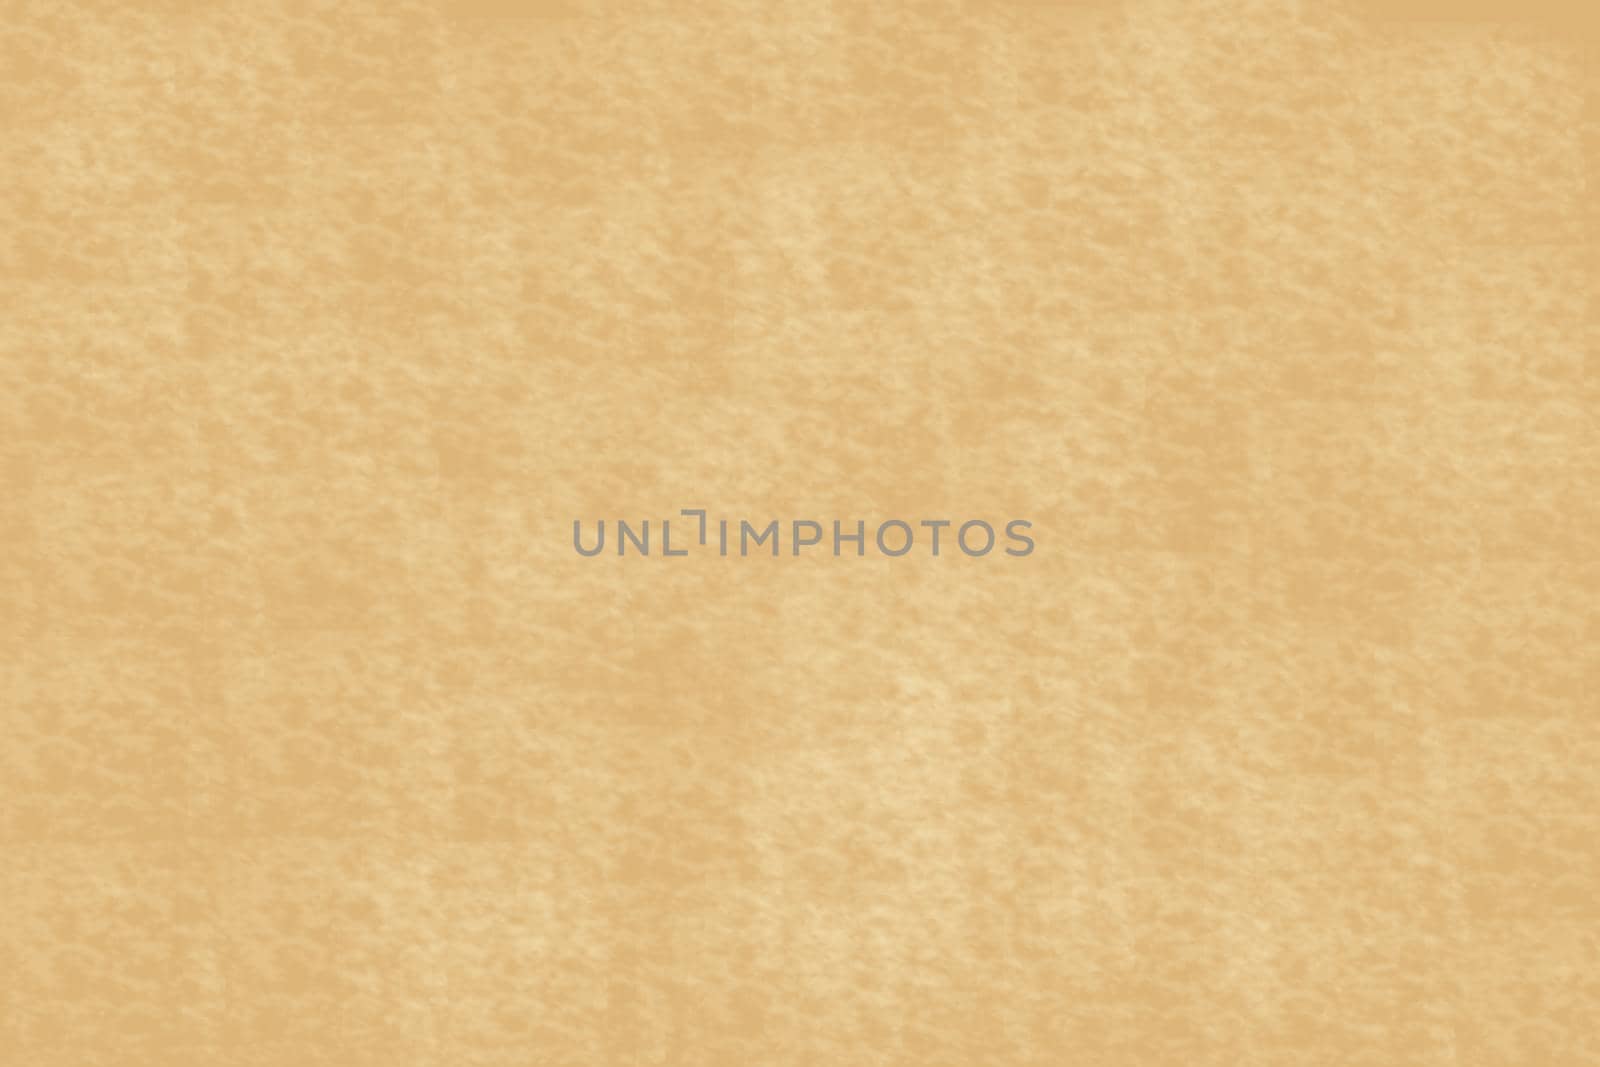 Beautiful abstract beige texture background. Illustration. Background for the site, banners, postcards.